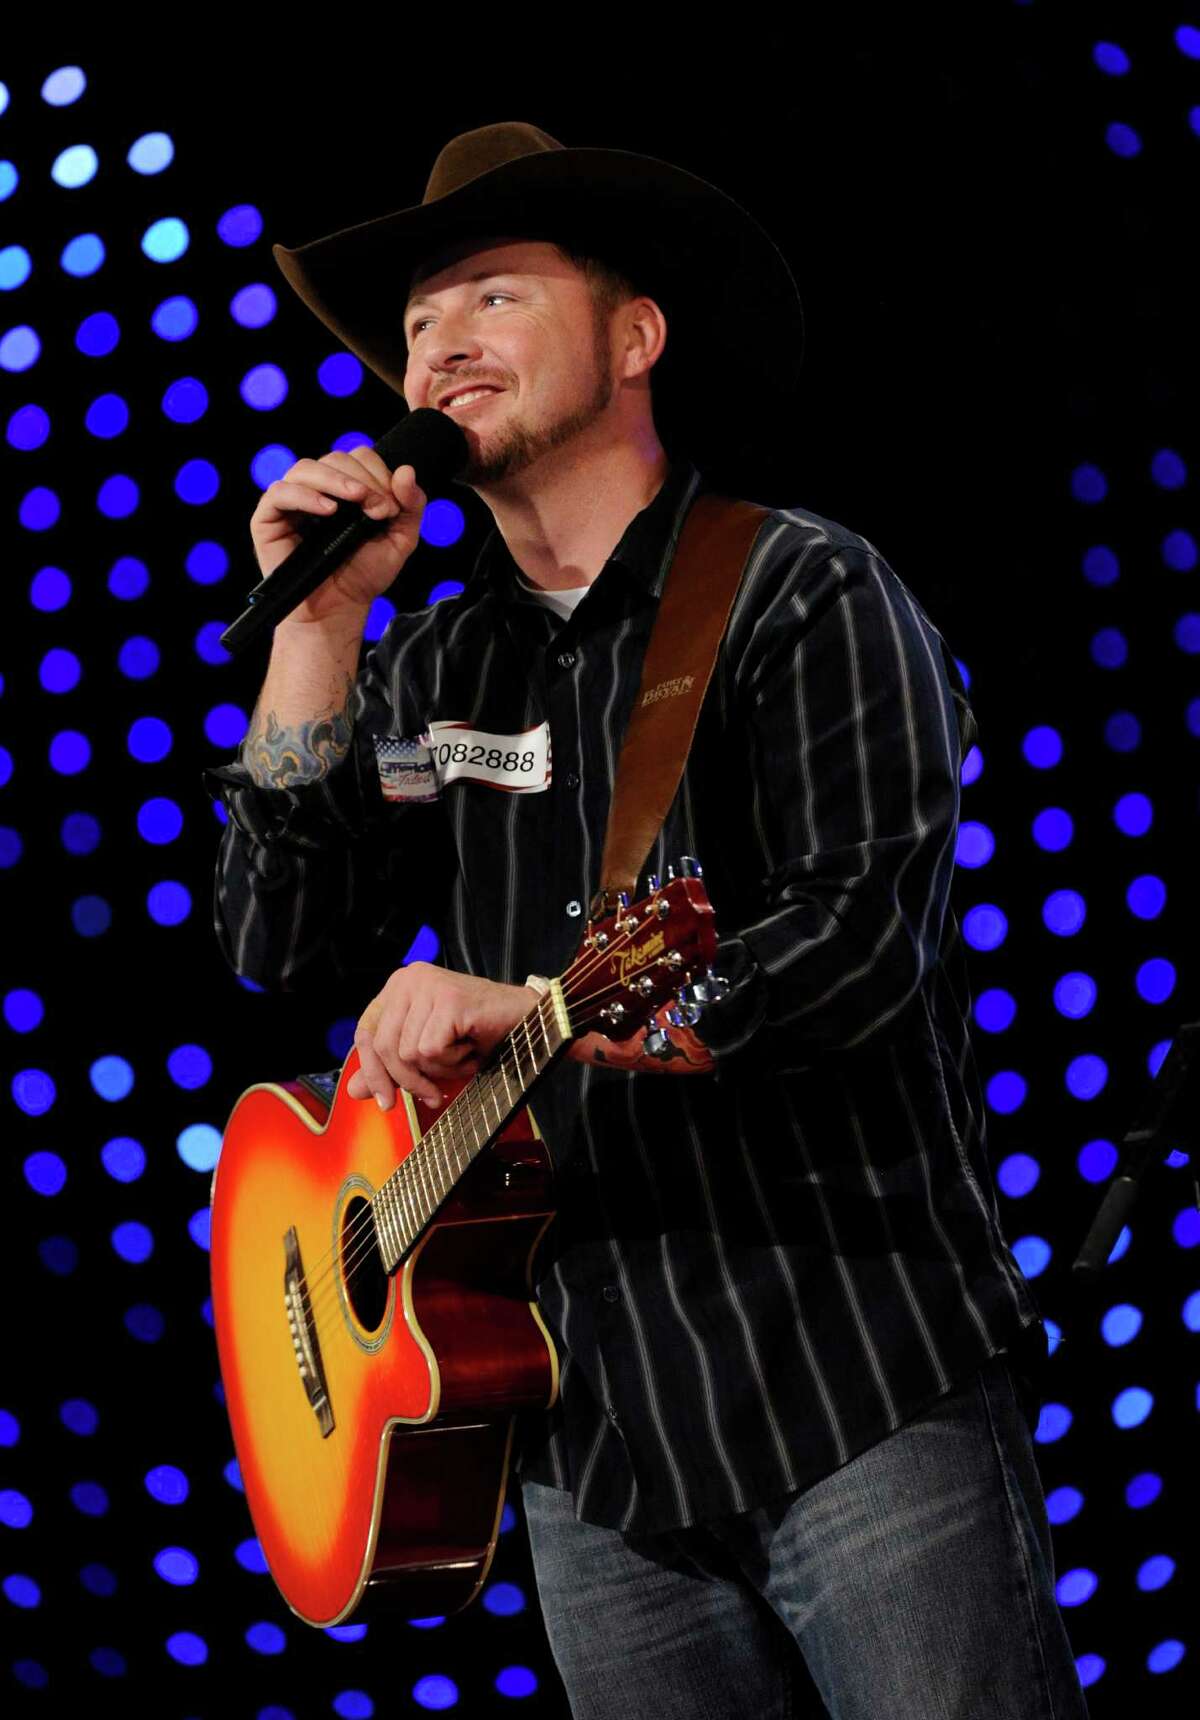 In this photo provided by NBCUniversal, Timothy Michael Poe appears on "America's Got Talent," on the episode that aired Monday, June 4, 2012. Poe, who claimed he was injured during a grenade blast in Afghanistan, has no military record of his purported combat injuries, the Minnesota National Guard said Tuesday, June 5, 2012.